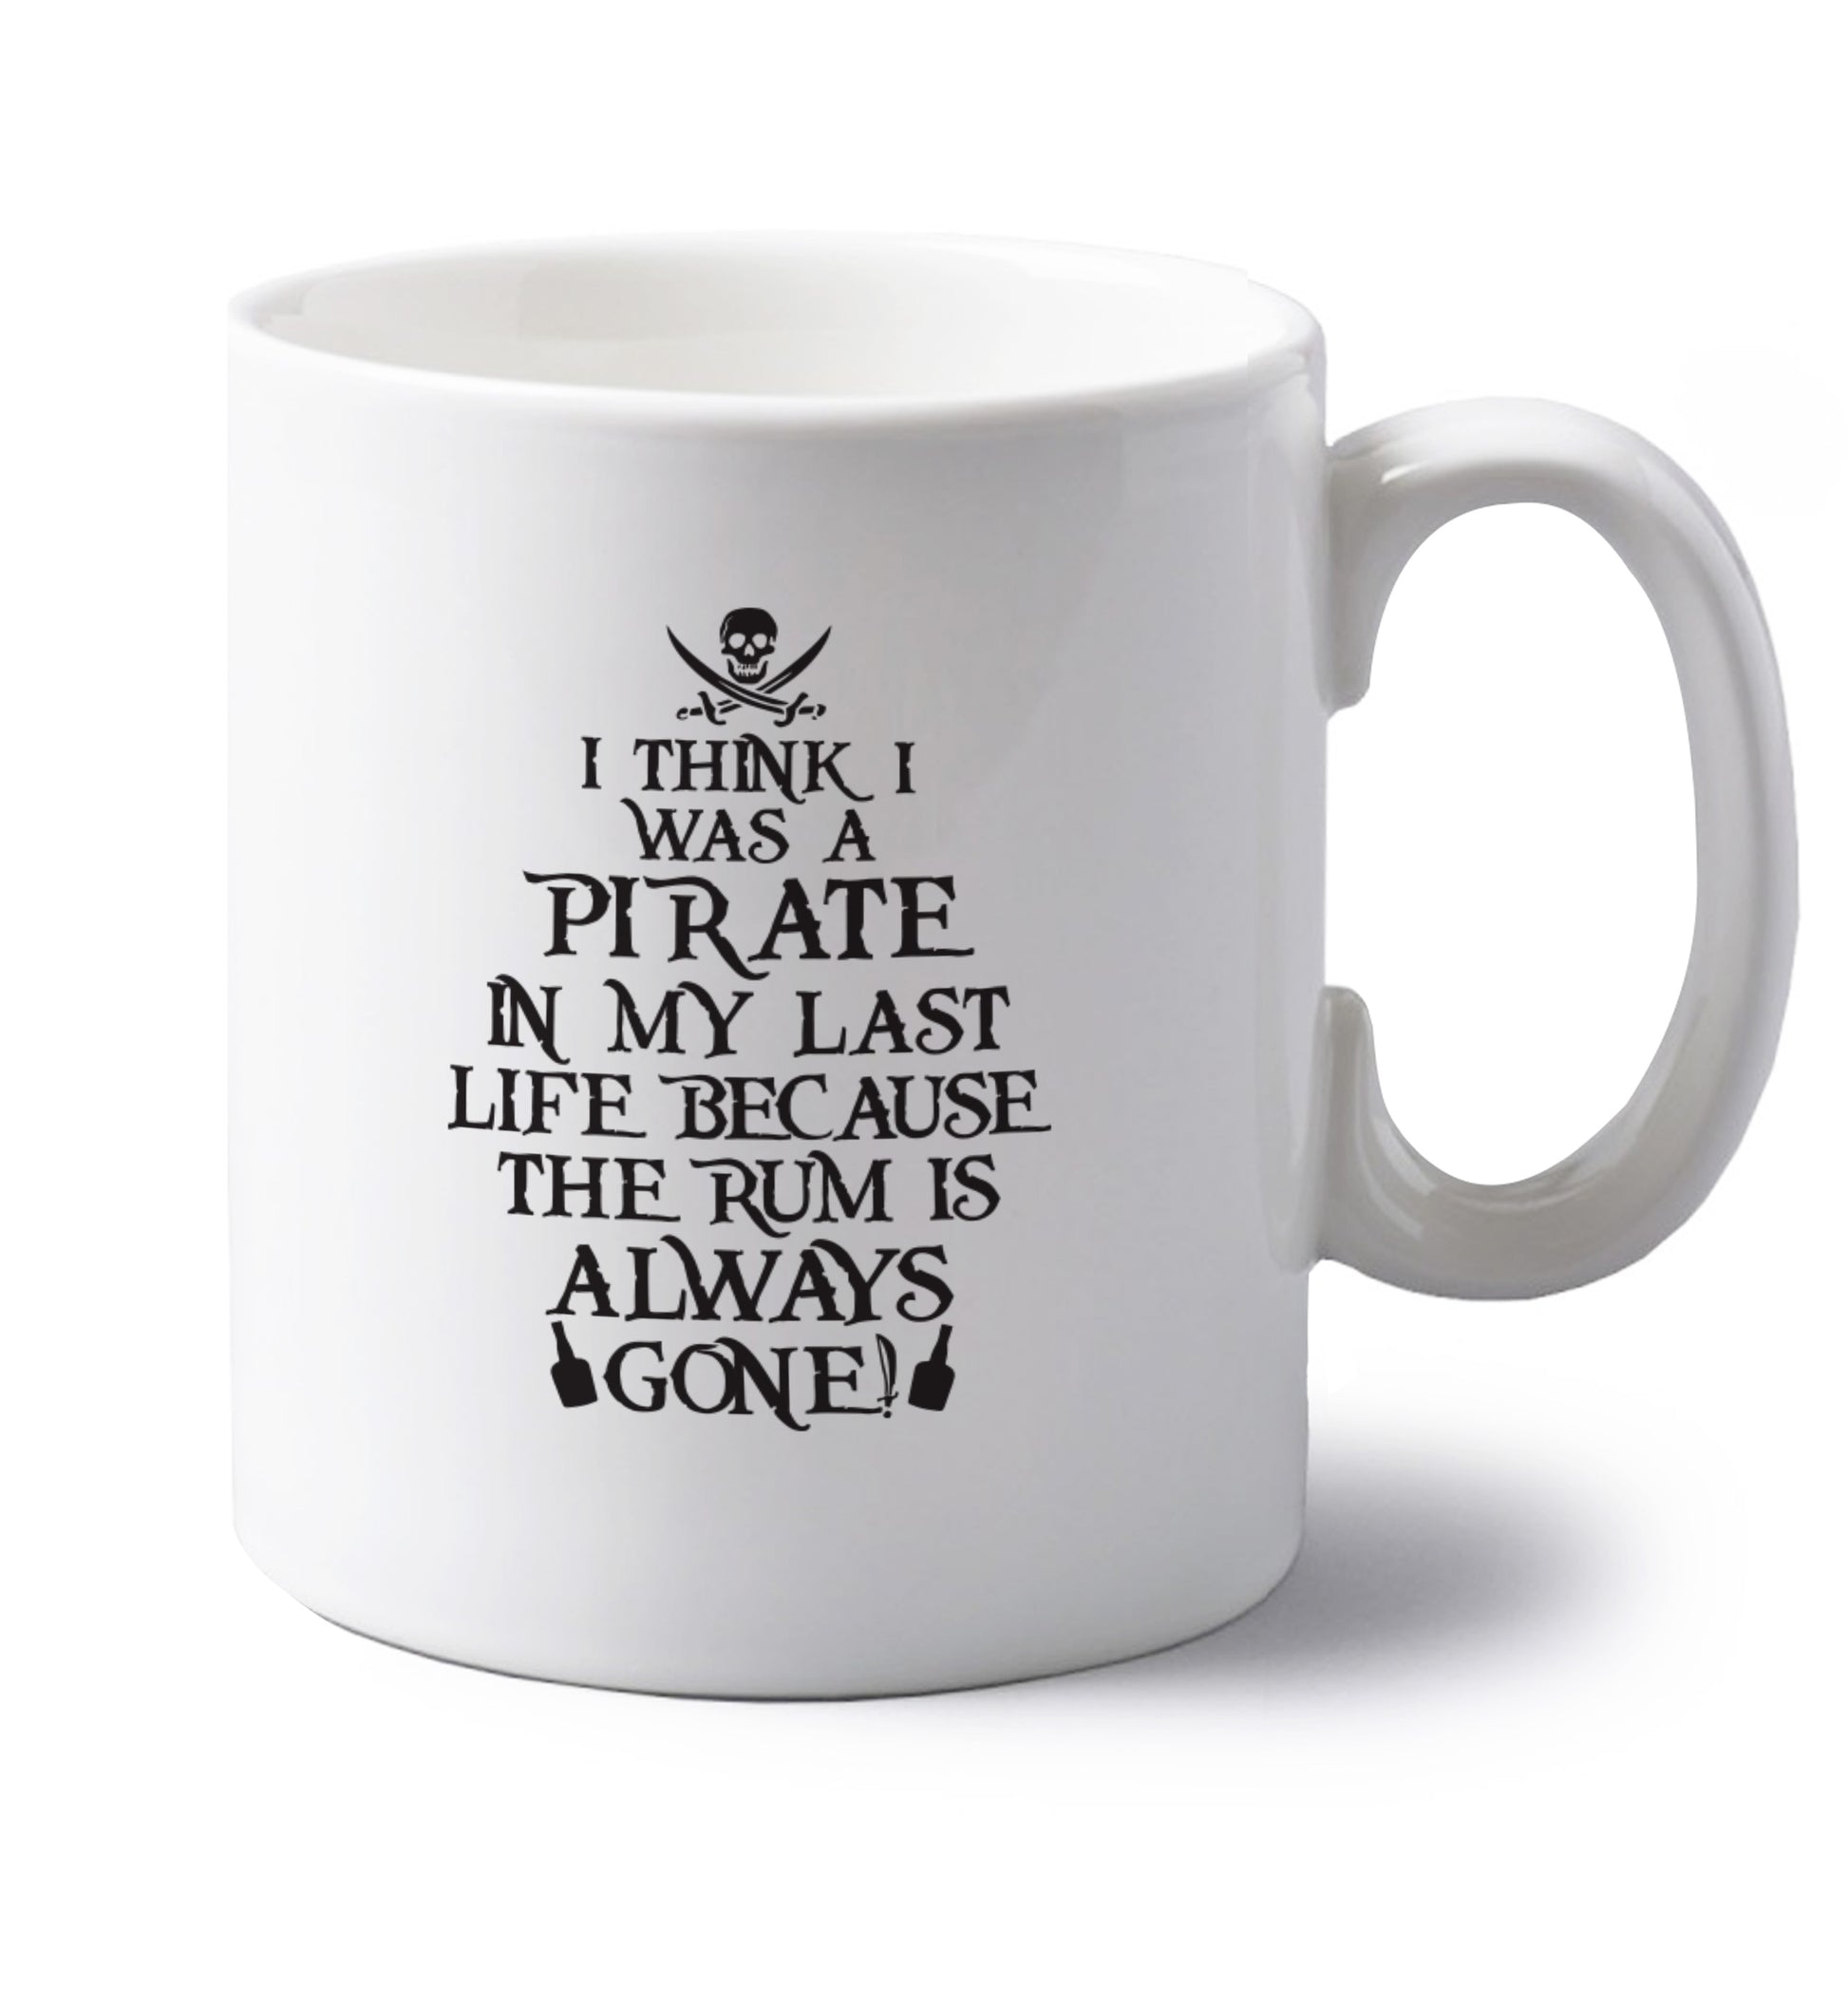 I think I was a pirate in my past life because the rum is always gone! left handed white ceramic mug 